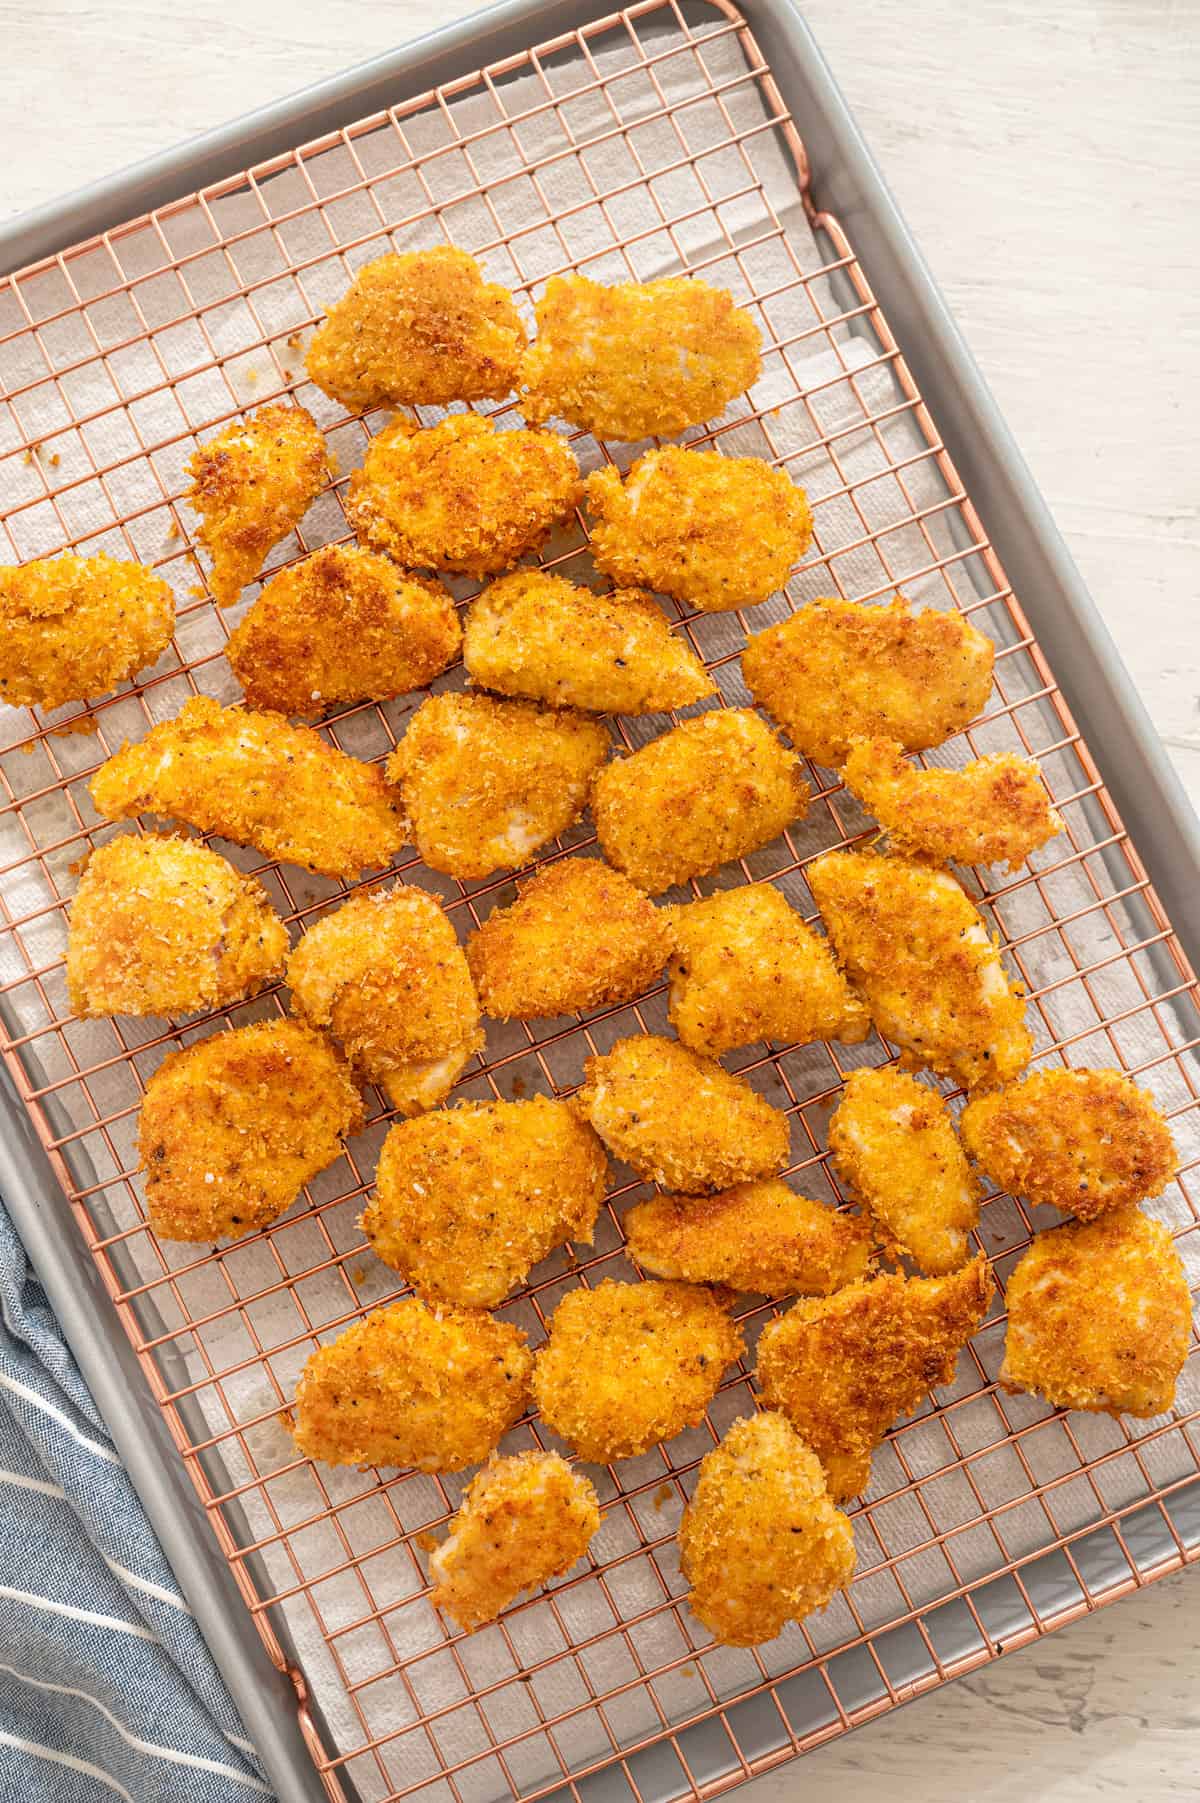 Homemade chicken nuggets on a cooking rack on top of baking sheet.